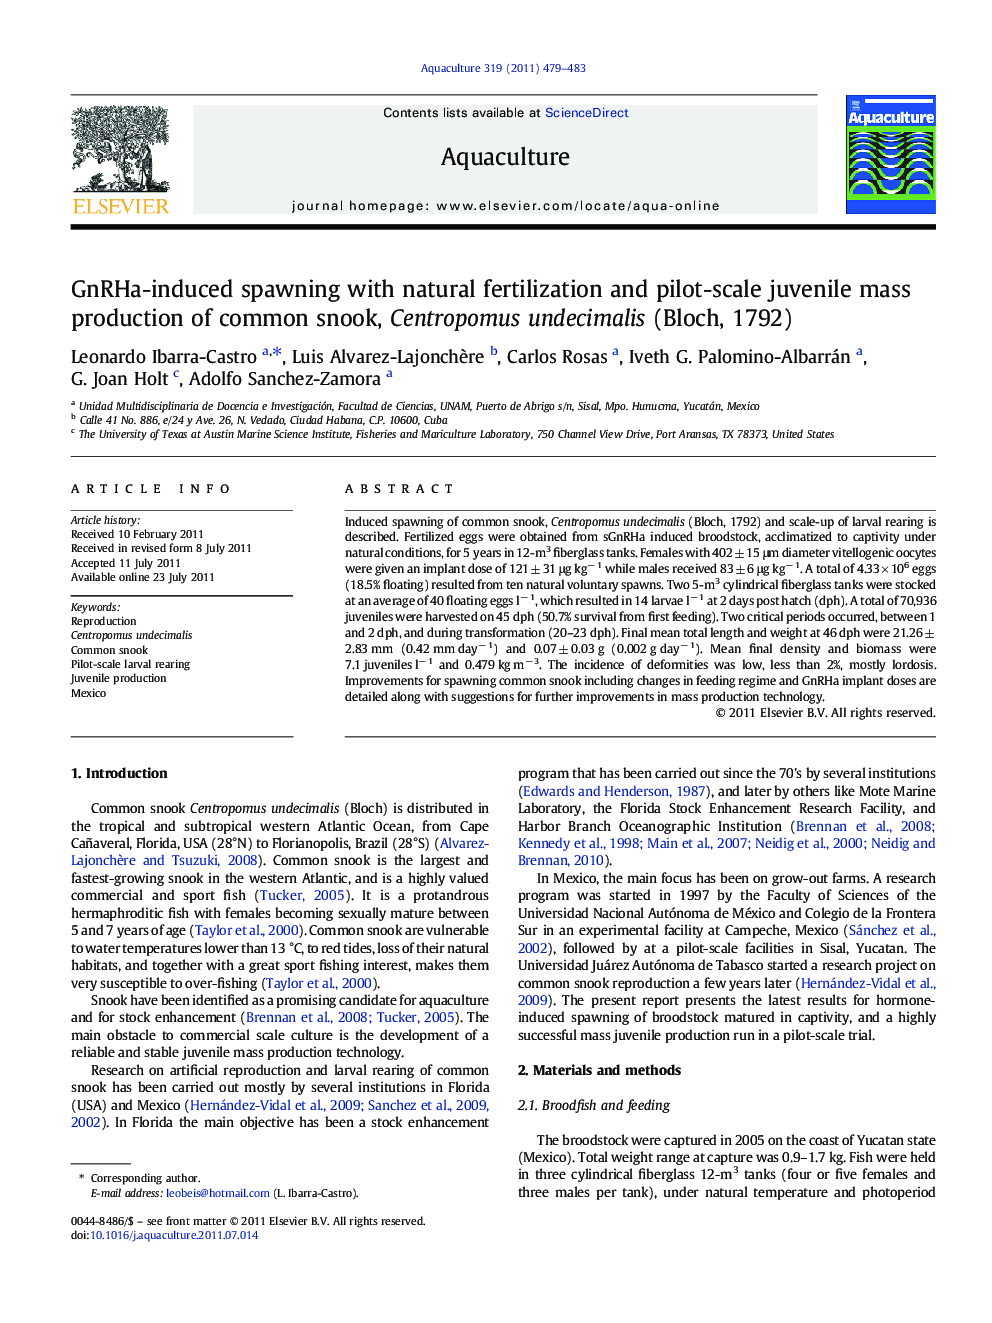 GnRHa-induced spawning with natural fertilization and pilot-scale juvenile mass production of common snook, Centropomus undecimalis (Bloch, 1792)